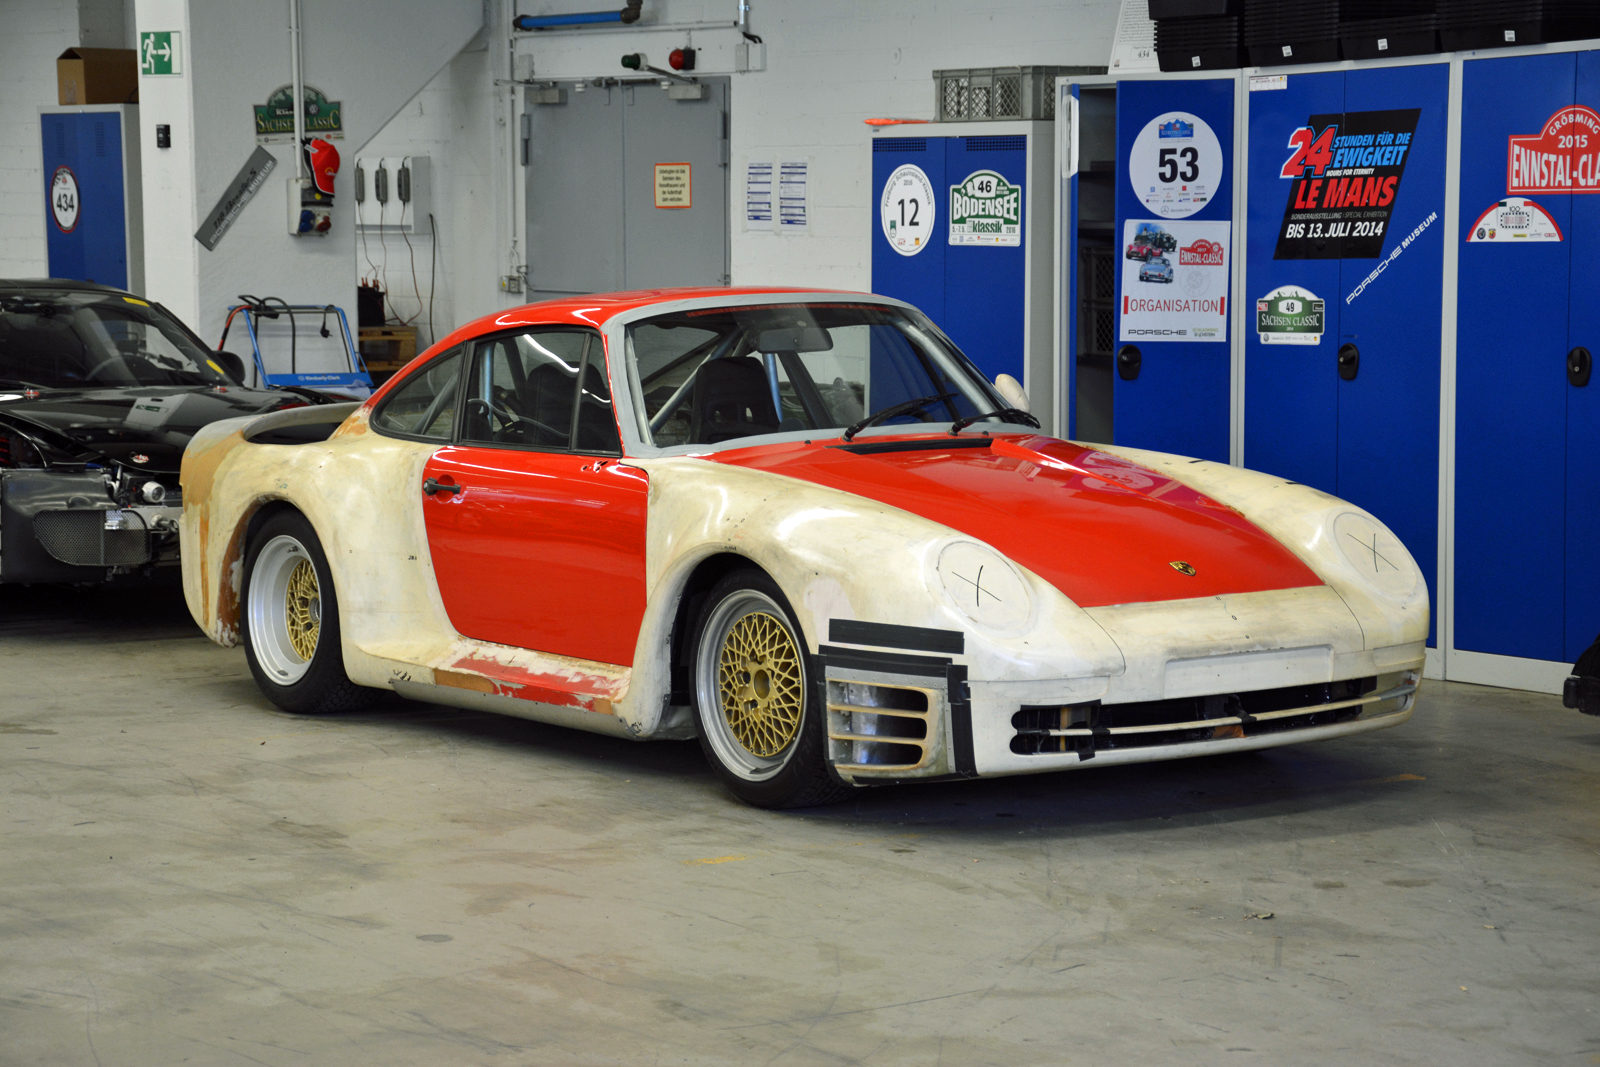 <p>This early 959 prototype was extensively tested in a wind tunnel in <strong>1982</strong>, a year before the model left enthusiasts speechless at the <strong>Frankfurt motor show</strong>. Porsche points out the test mule’s spoiler is integrated into the deck lid, and its underbody is equipped with a plastic cover. Hand-written notes all over the body are a testament to the numerous tweaks made before achieving a 0.31 drag coefficient.</p>